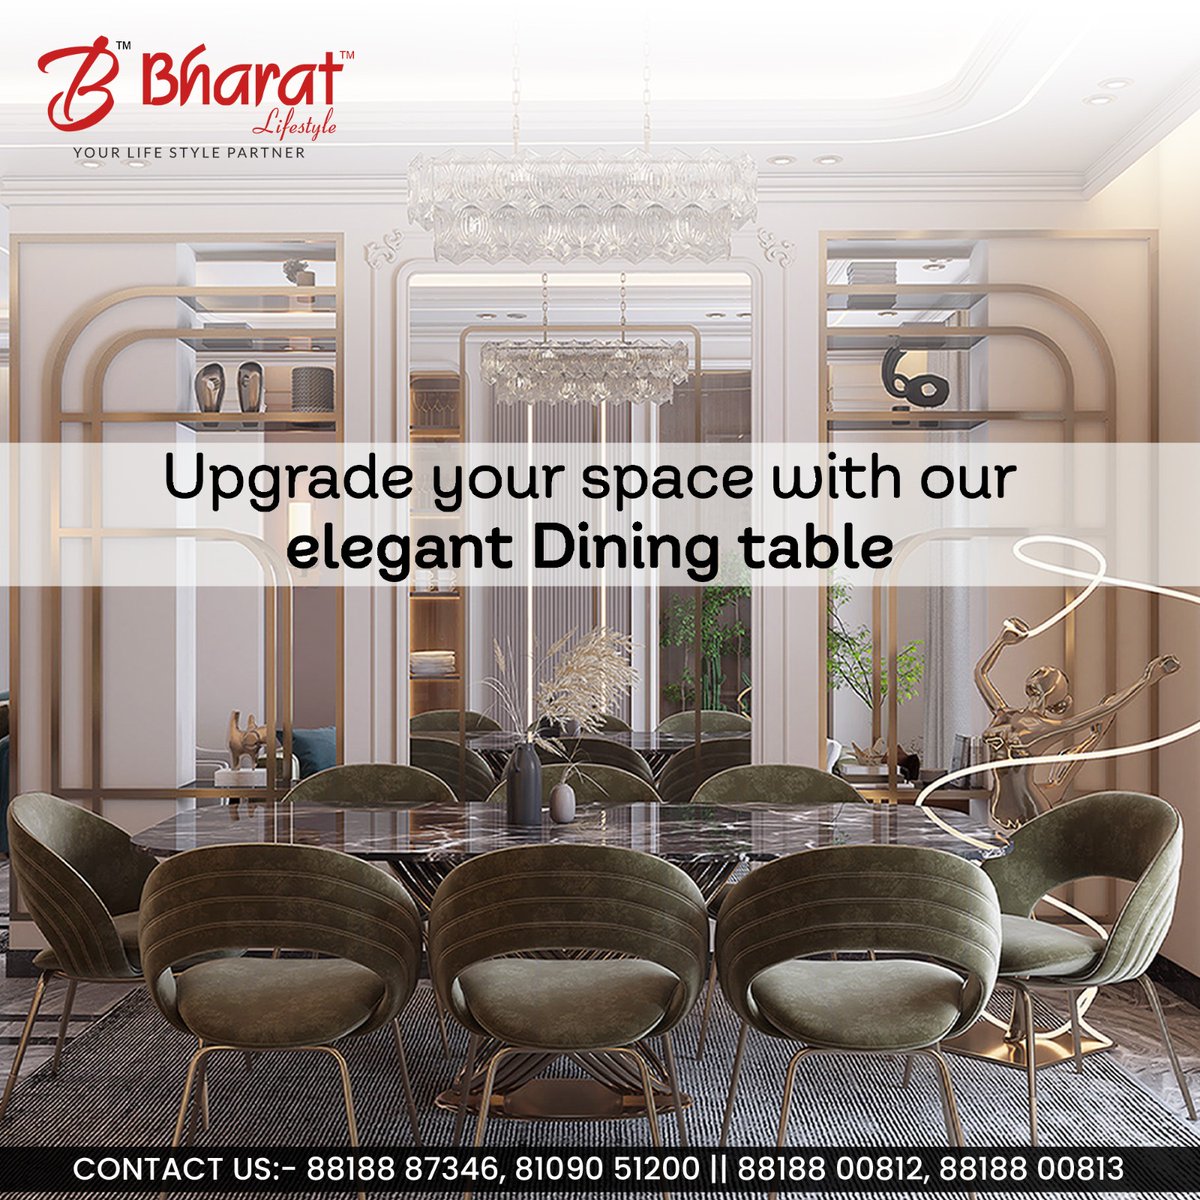 Upgrade your space with our elegant Dining table
.
Visit:- bharatlifestylefurniture.com
.
#diningtable #diningroom #diningdecor #diningarea #diningroomdecor #diningtabledecor #diningchairs #diningtableset #diningroominspo #diningtablestyling #diningtabledesign #diningroomtable #indore